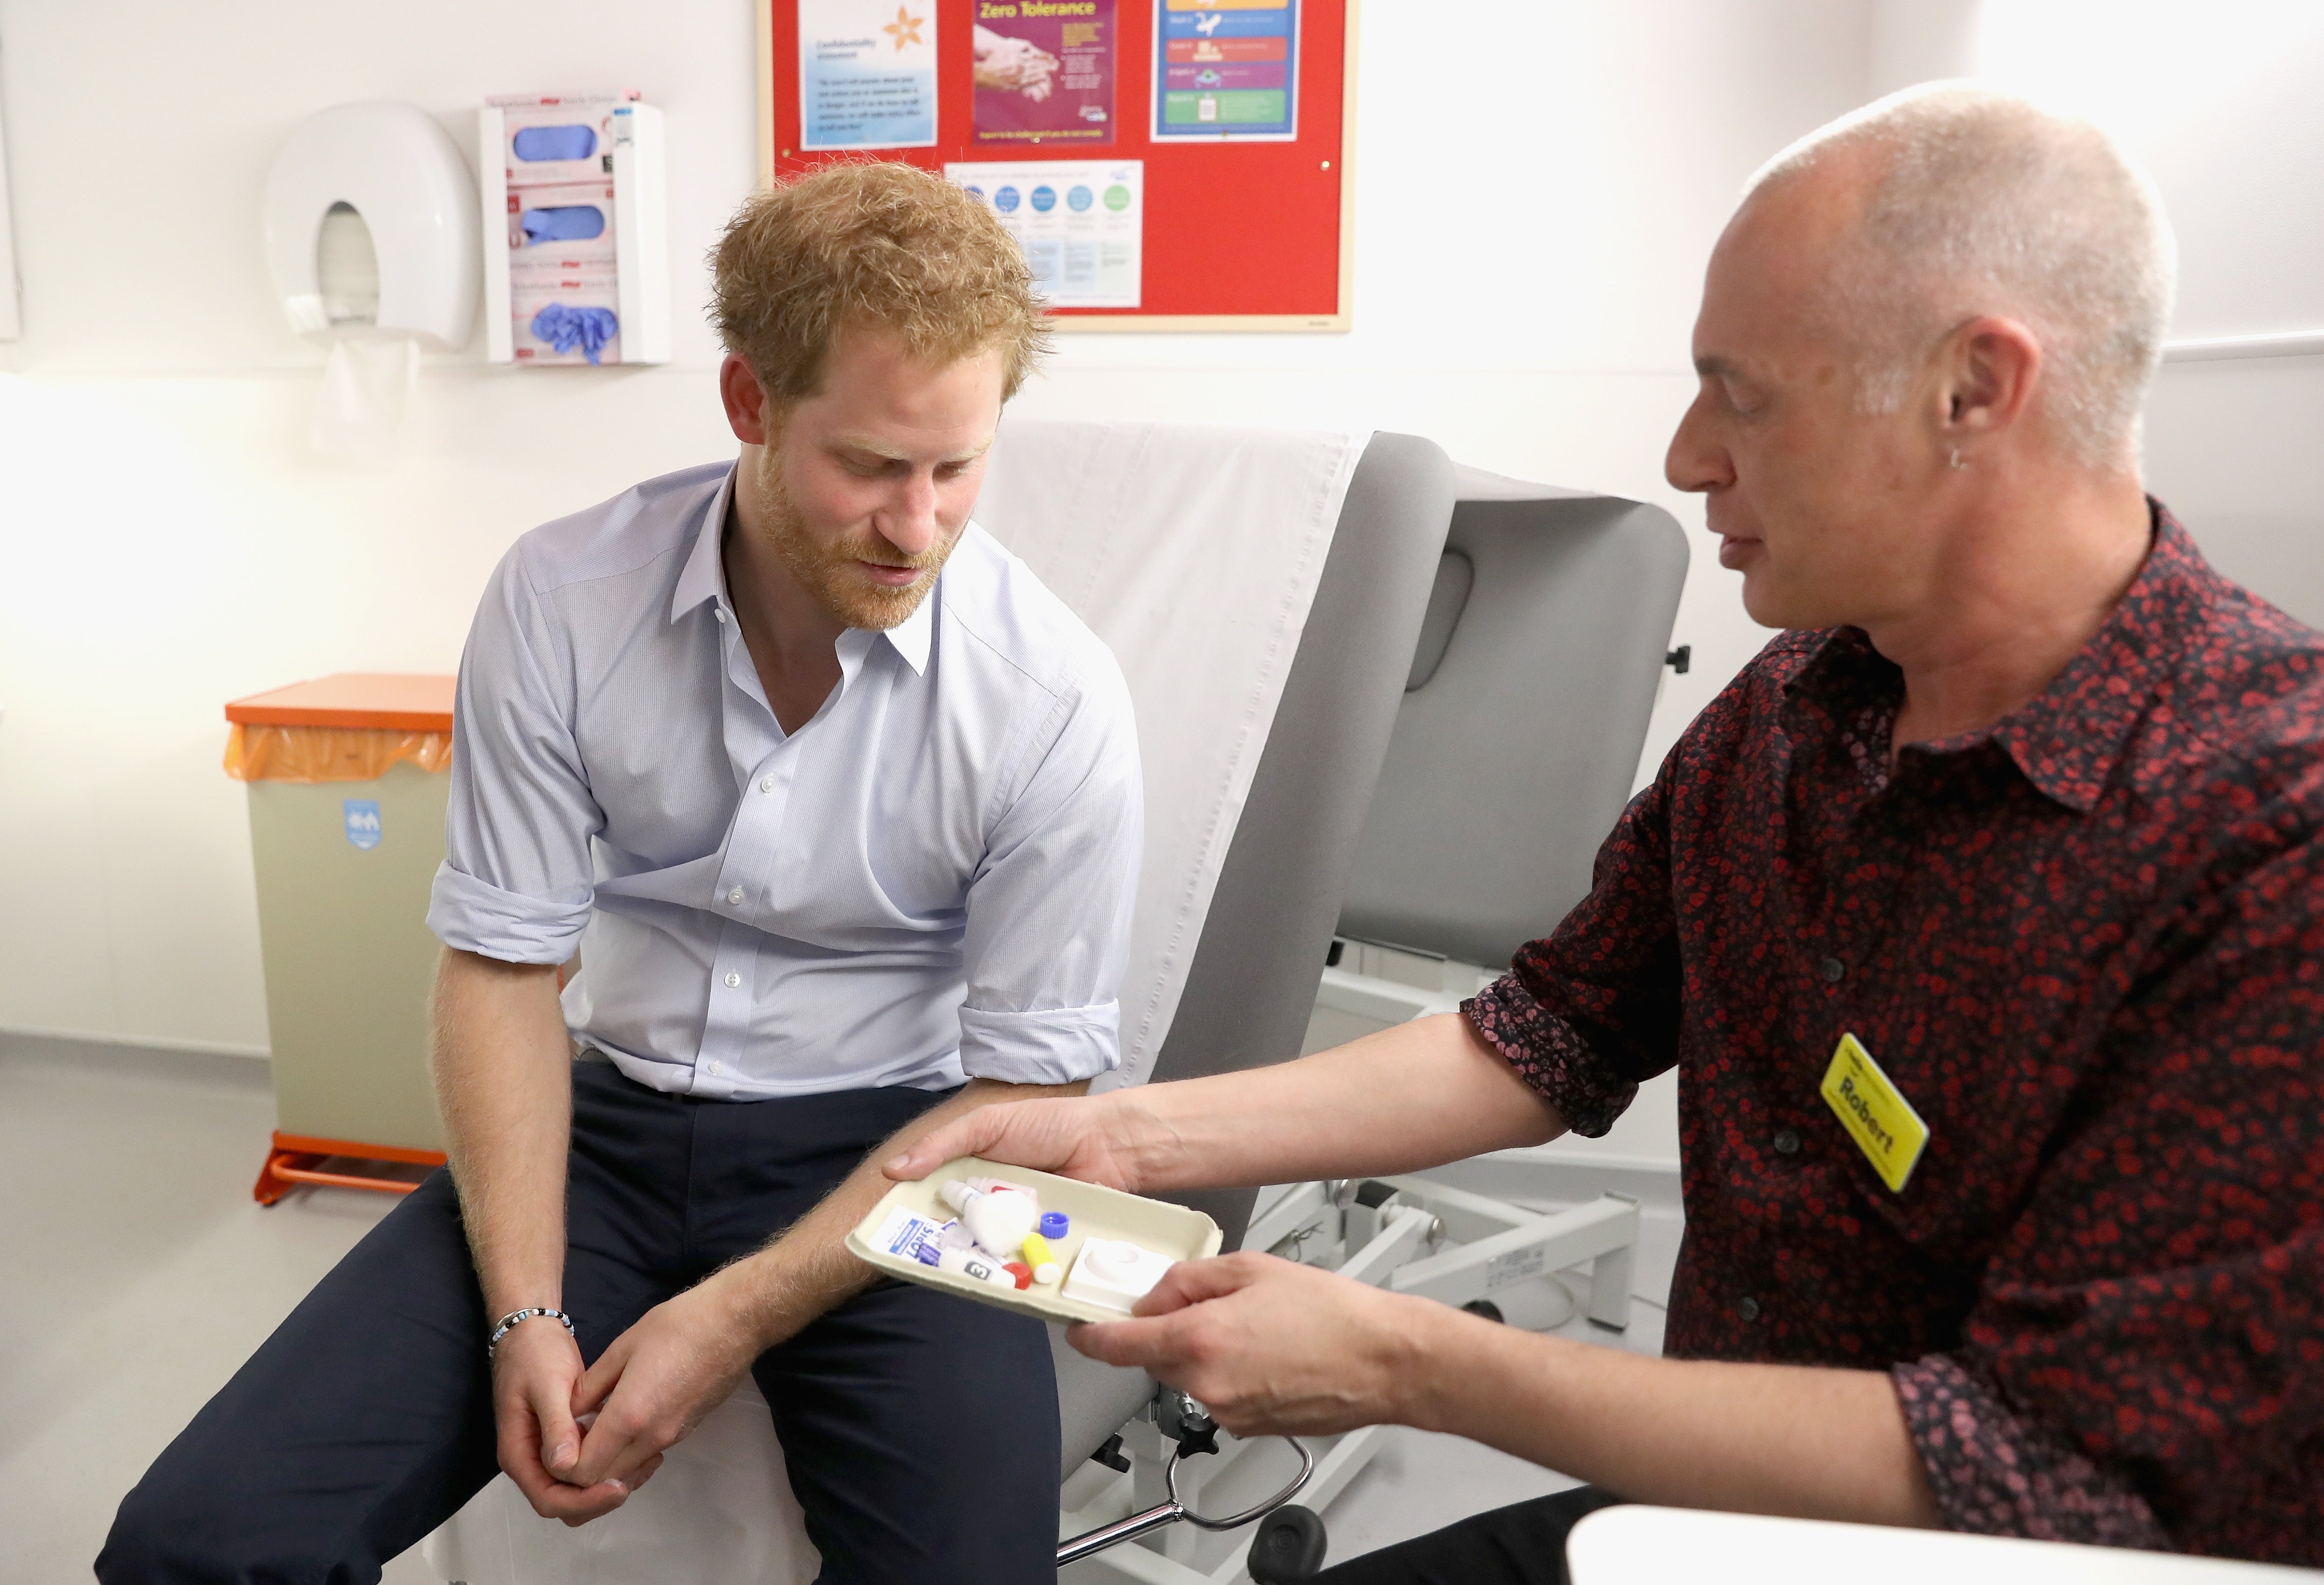 Prince Harry takes an HIV test in 2016 to raise awareness of testing facilities